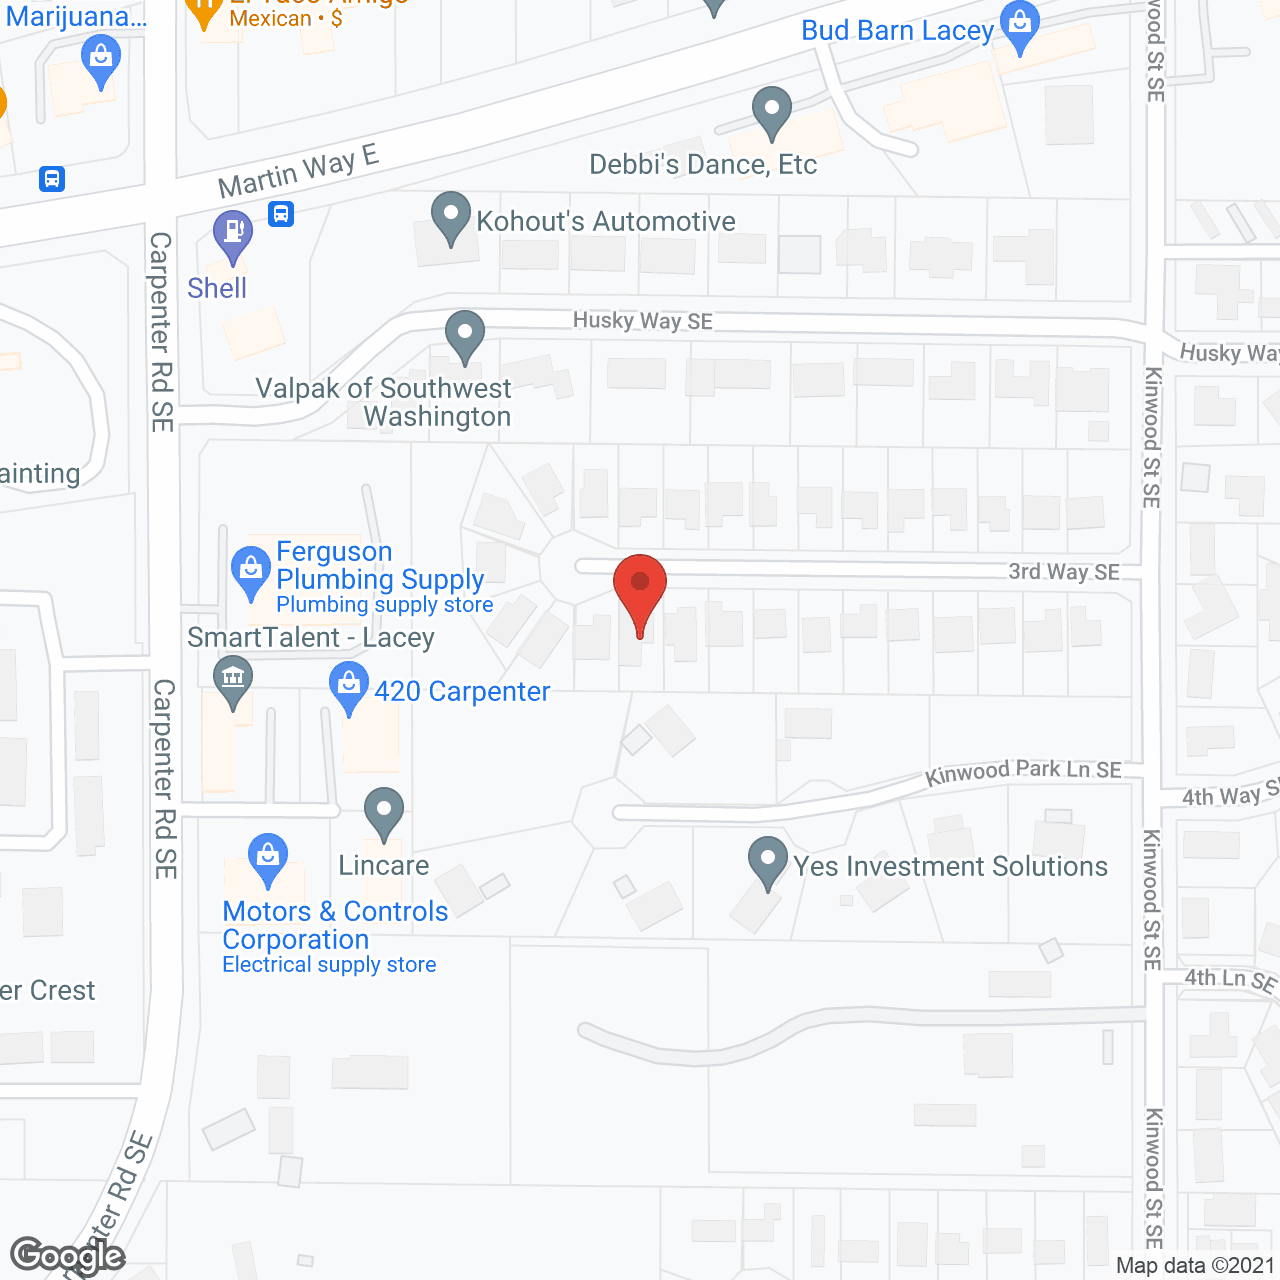 Sound Care Adult Family Home I in google map